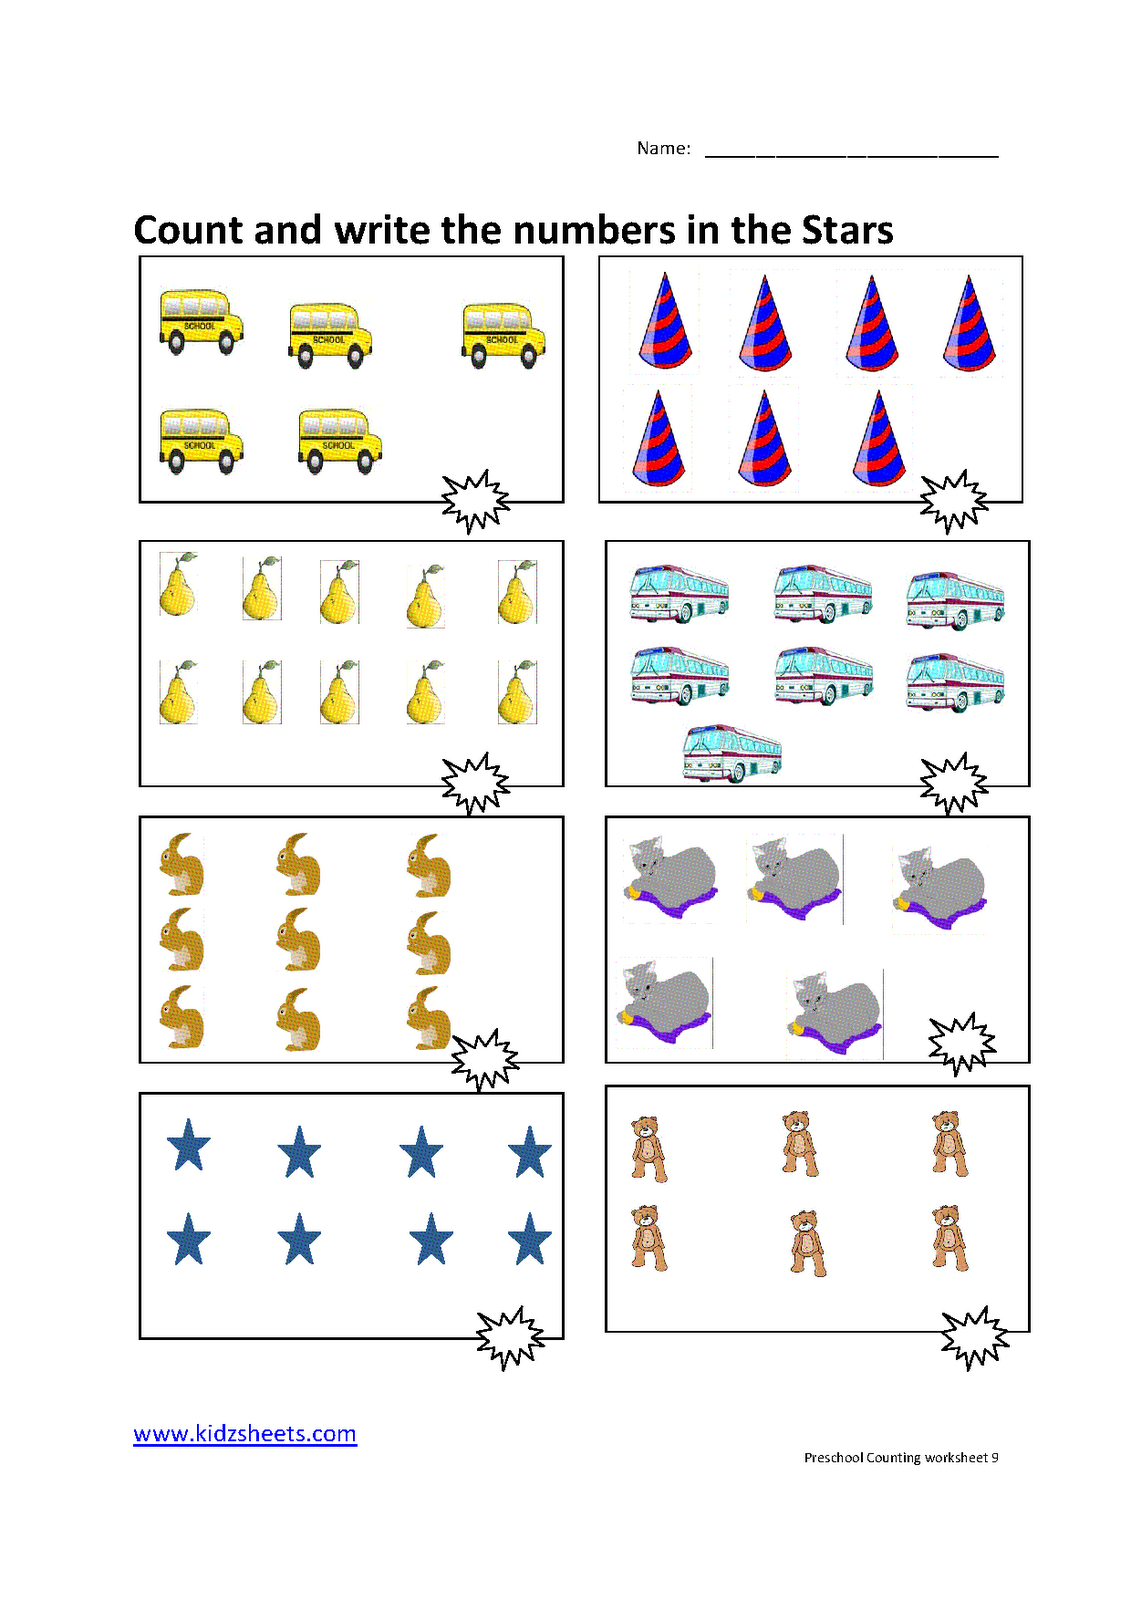 4 Best Images of Preschool Counting Worksheets Free ...